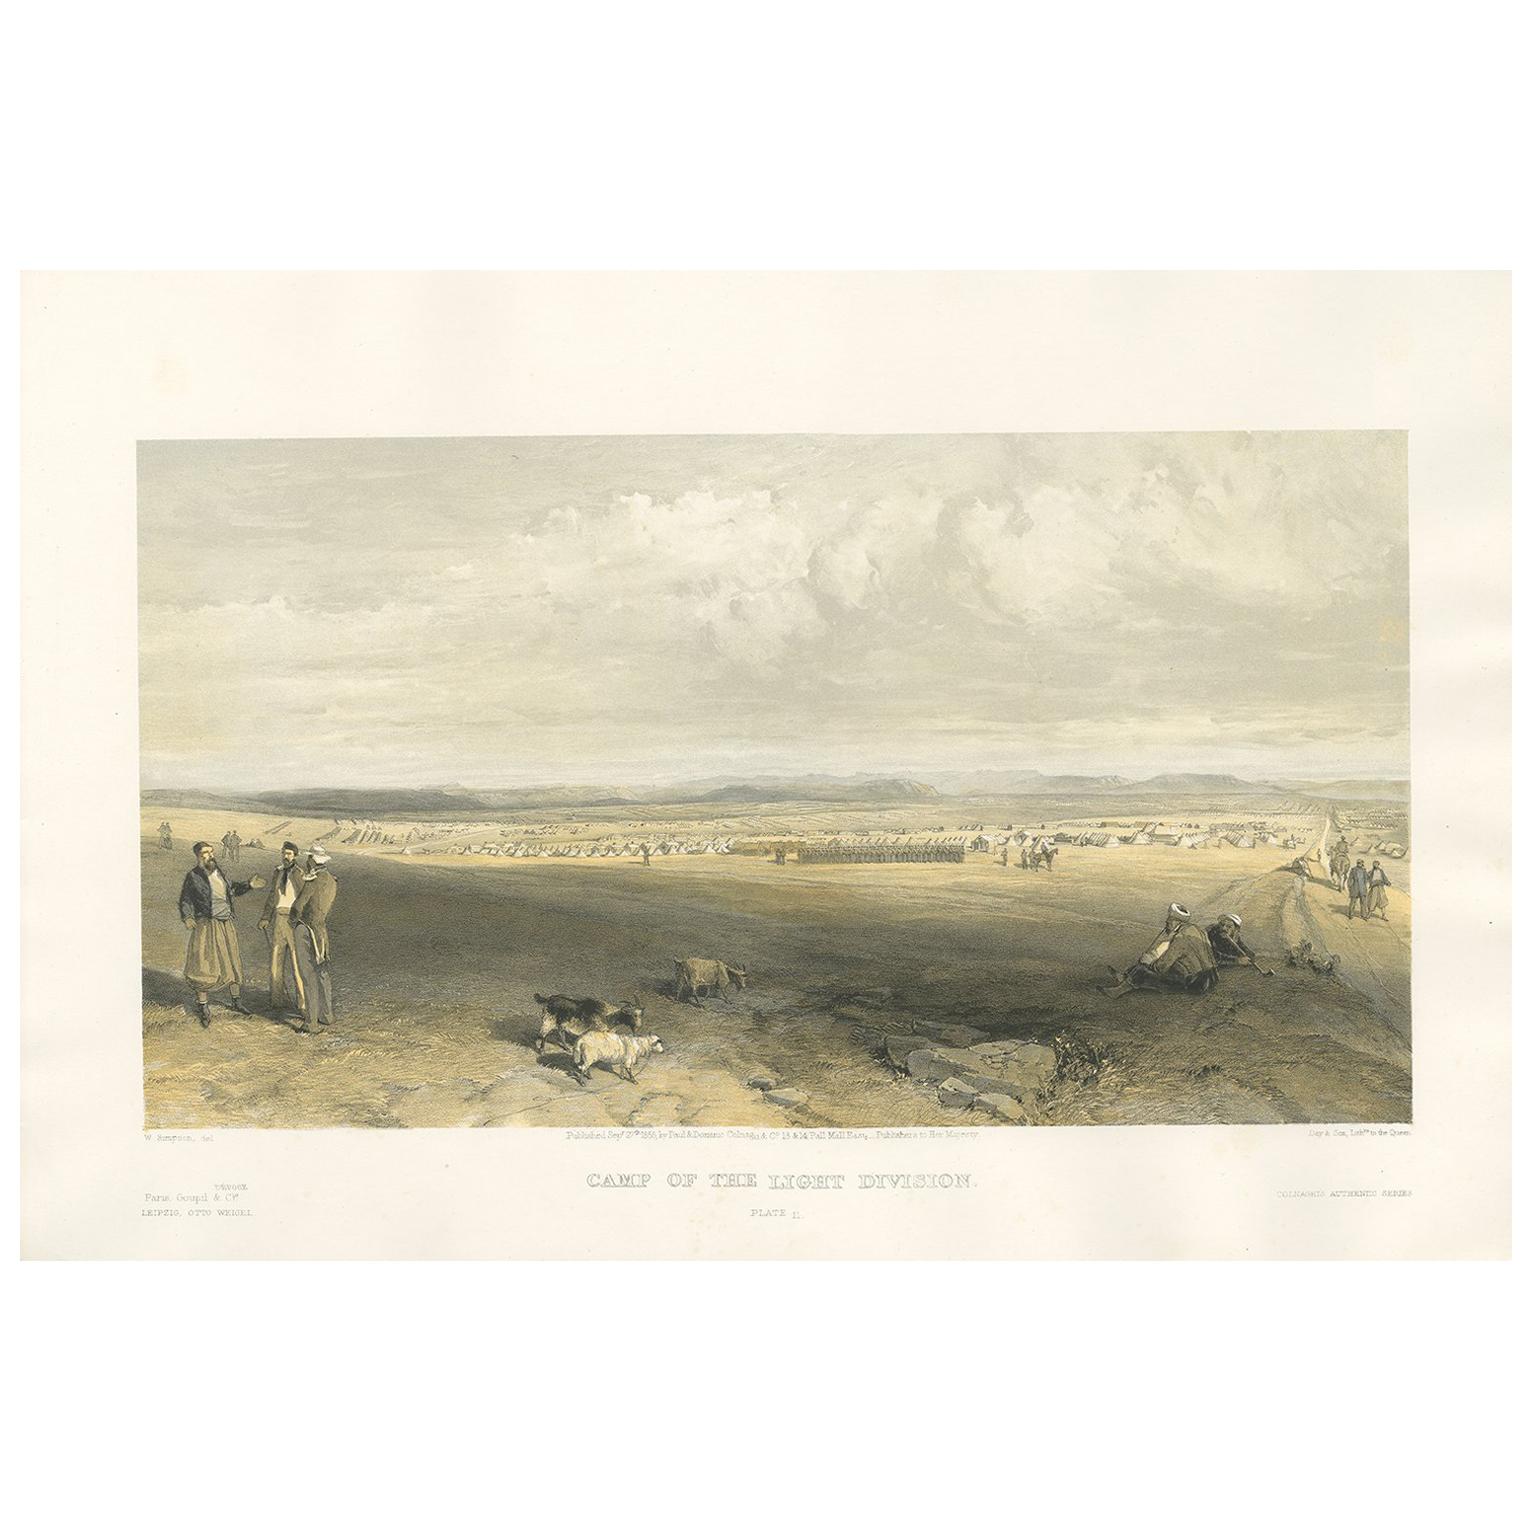 Antique Print of the Camp of Light Division 'Crimean War' by W. Simpson, 1855